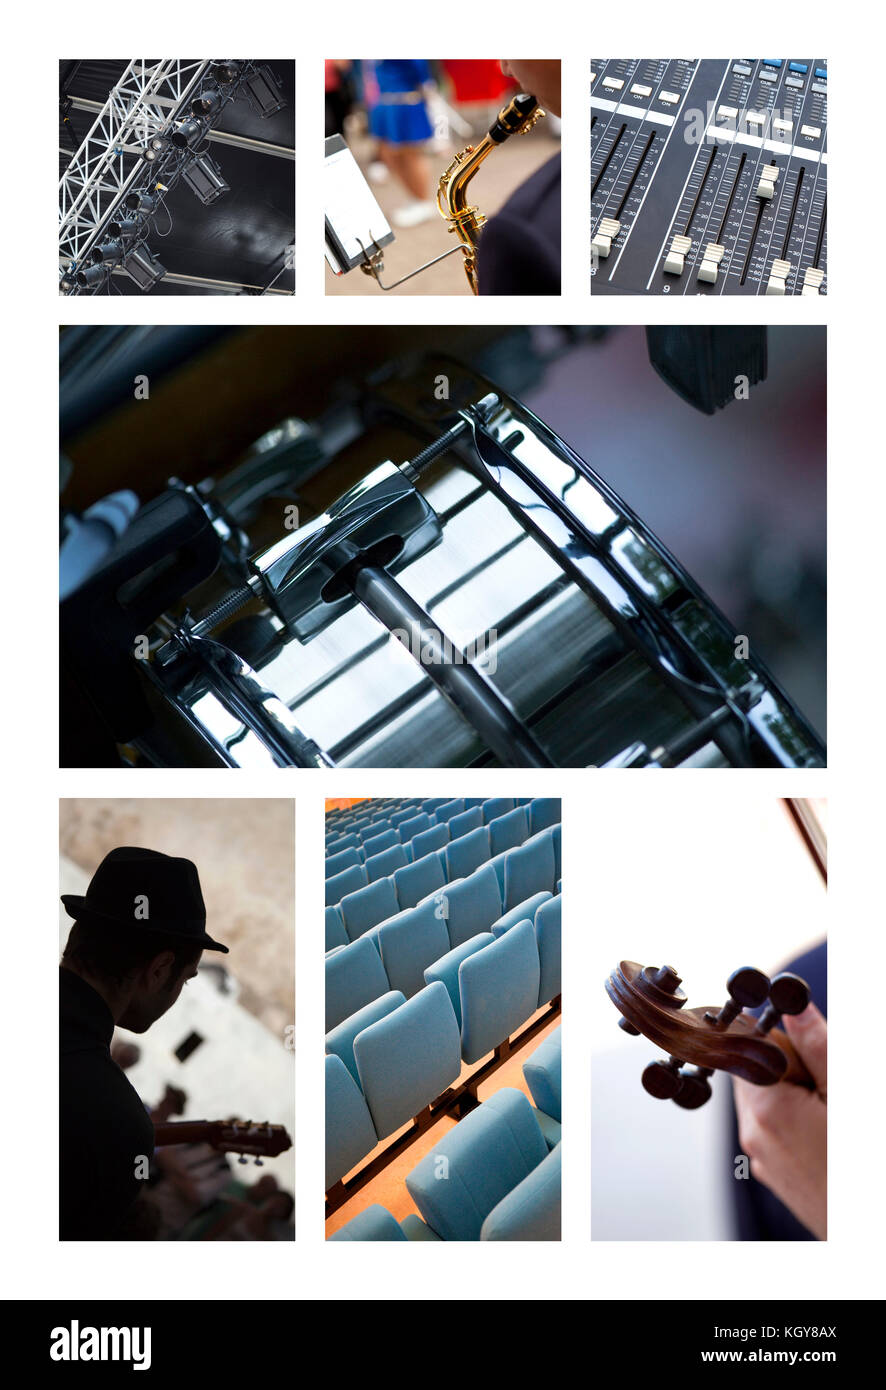 Musical instruments and sound control on a collage Stock Photo